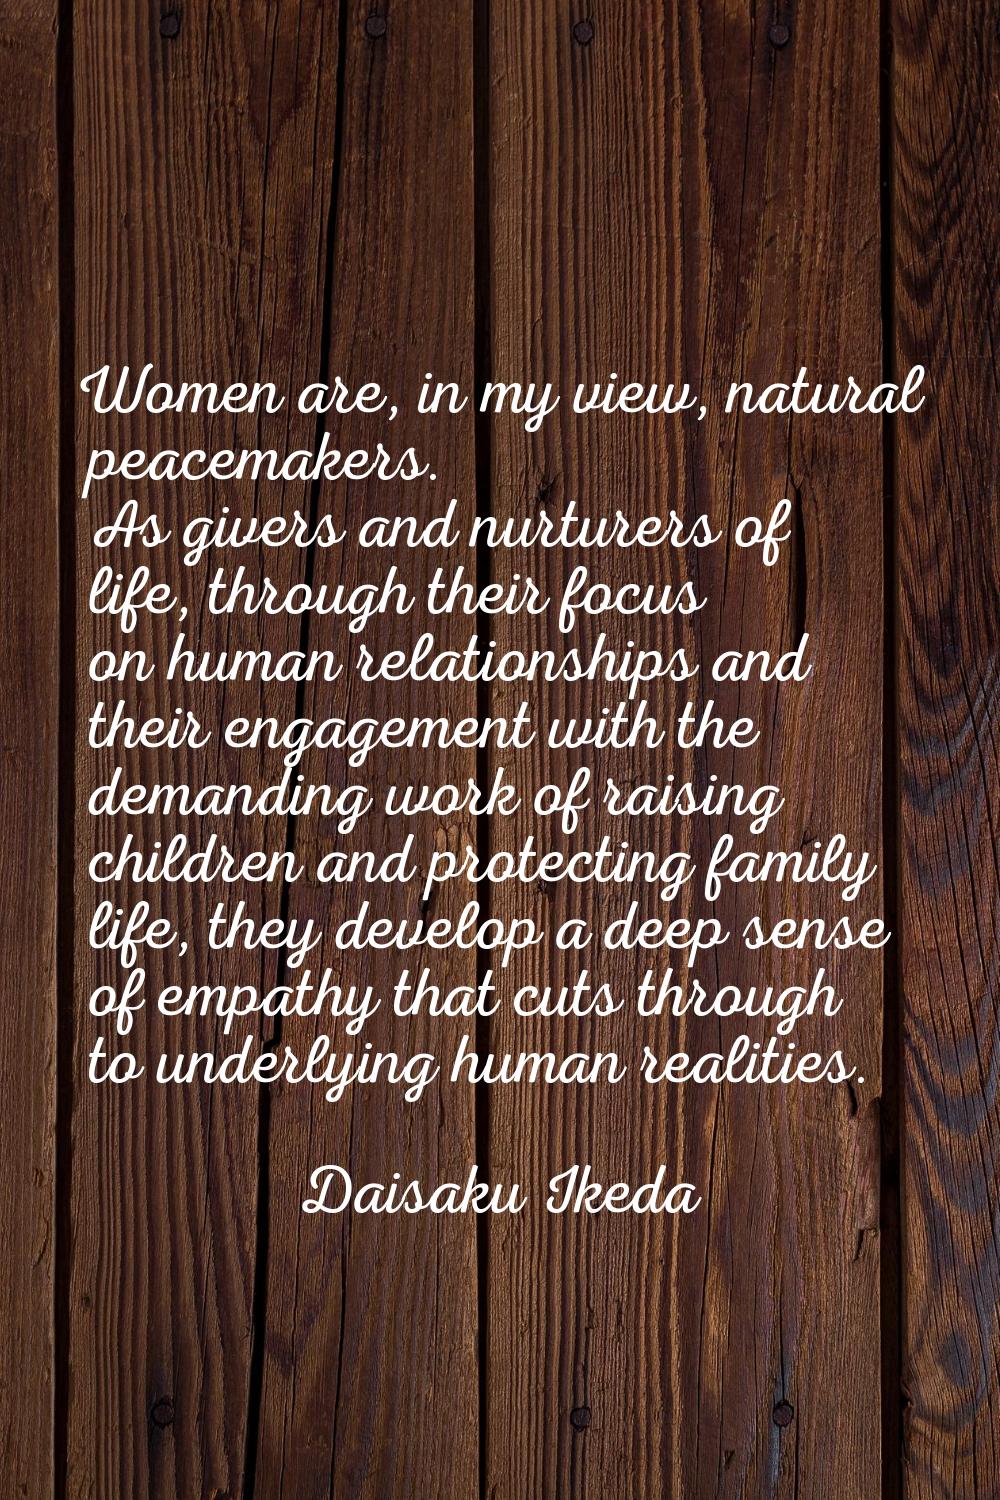 Women are, in my view, natural peacemakers. As givers and nurturers of life, through their focus on